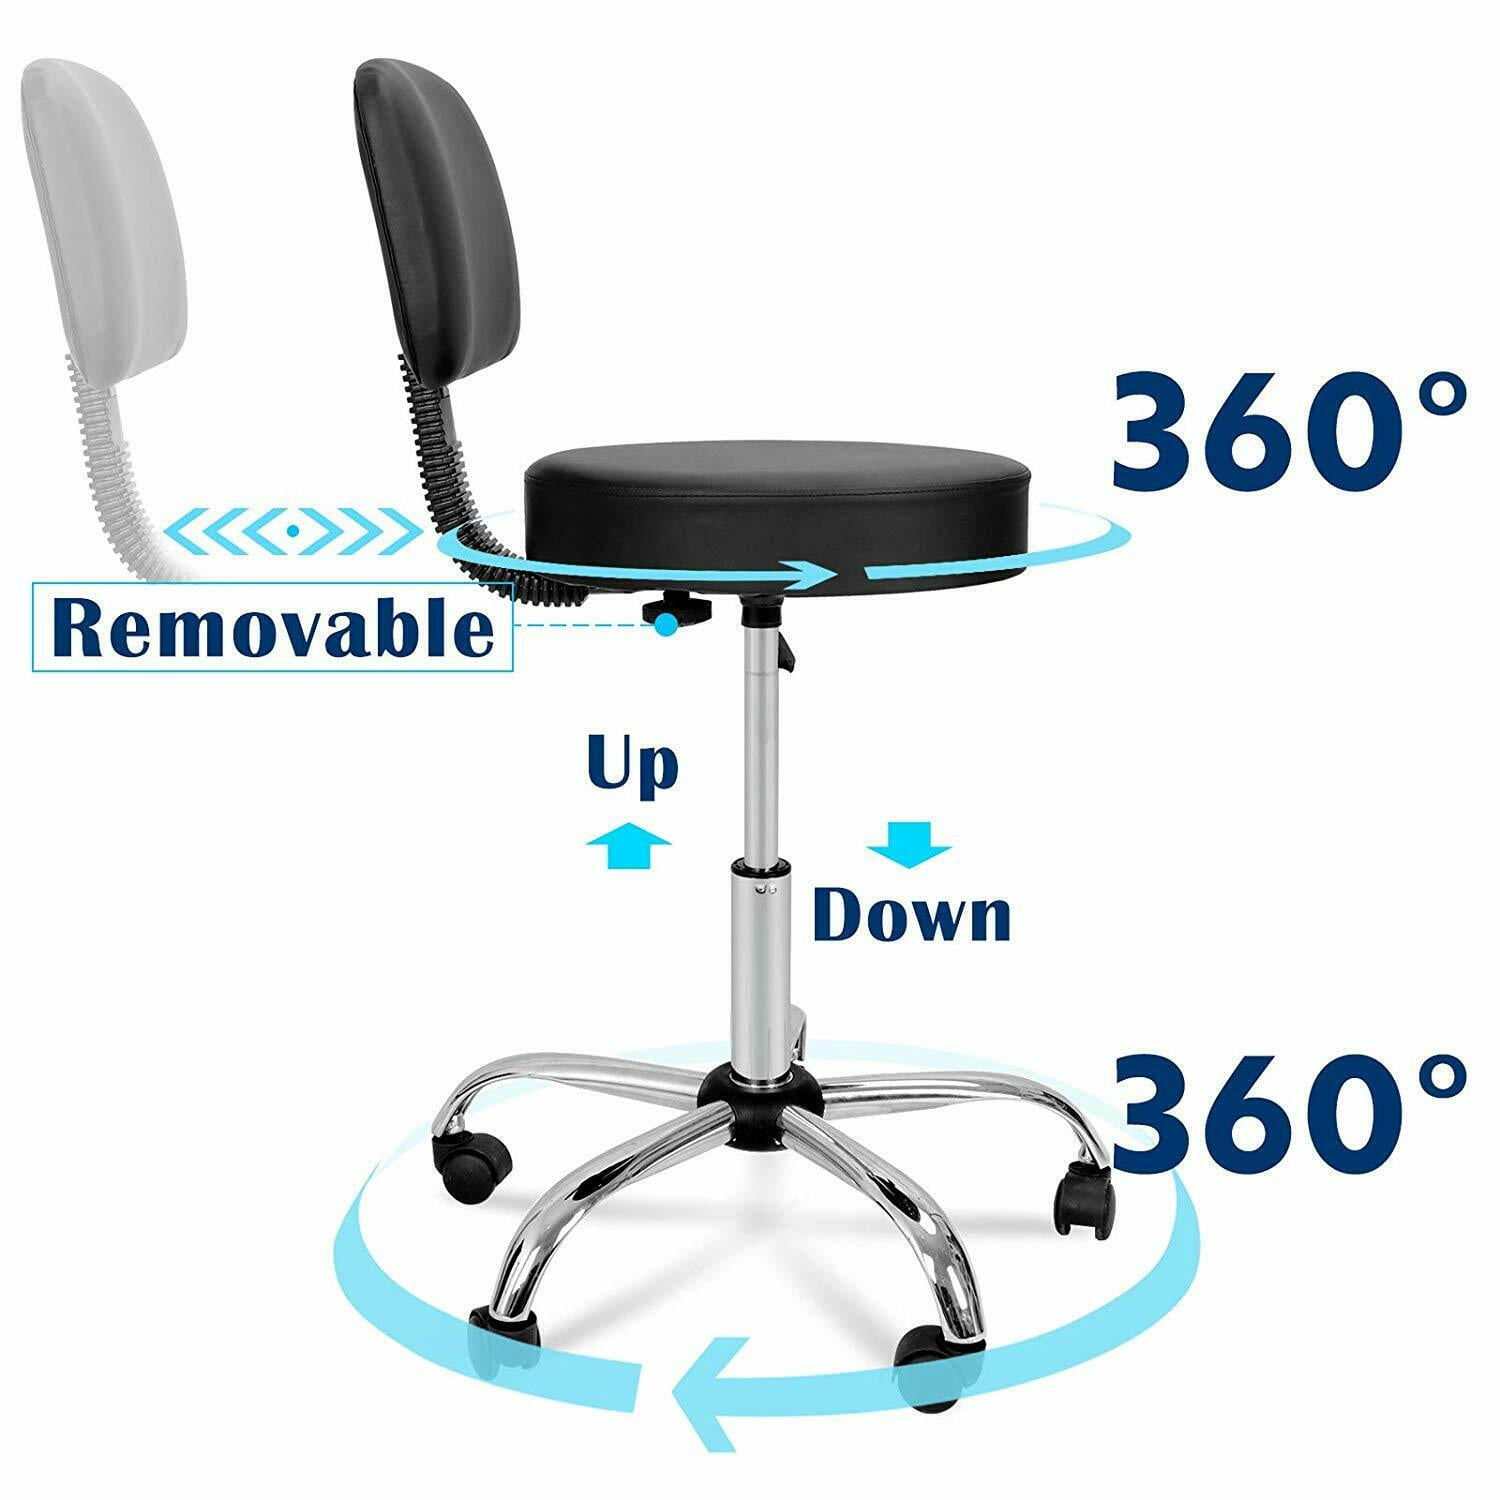 19B Adjustable Hydraulic Rolling Swivel Bar Stool Chair Salon Spa Stools Rest 360-degree Work Drafting Rolling Stool with Heavy Duty Metal Base for Clinic Dentist Spa Massage Office 